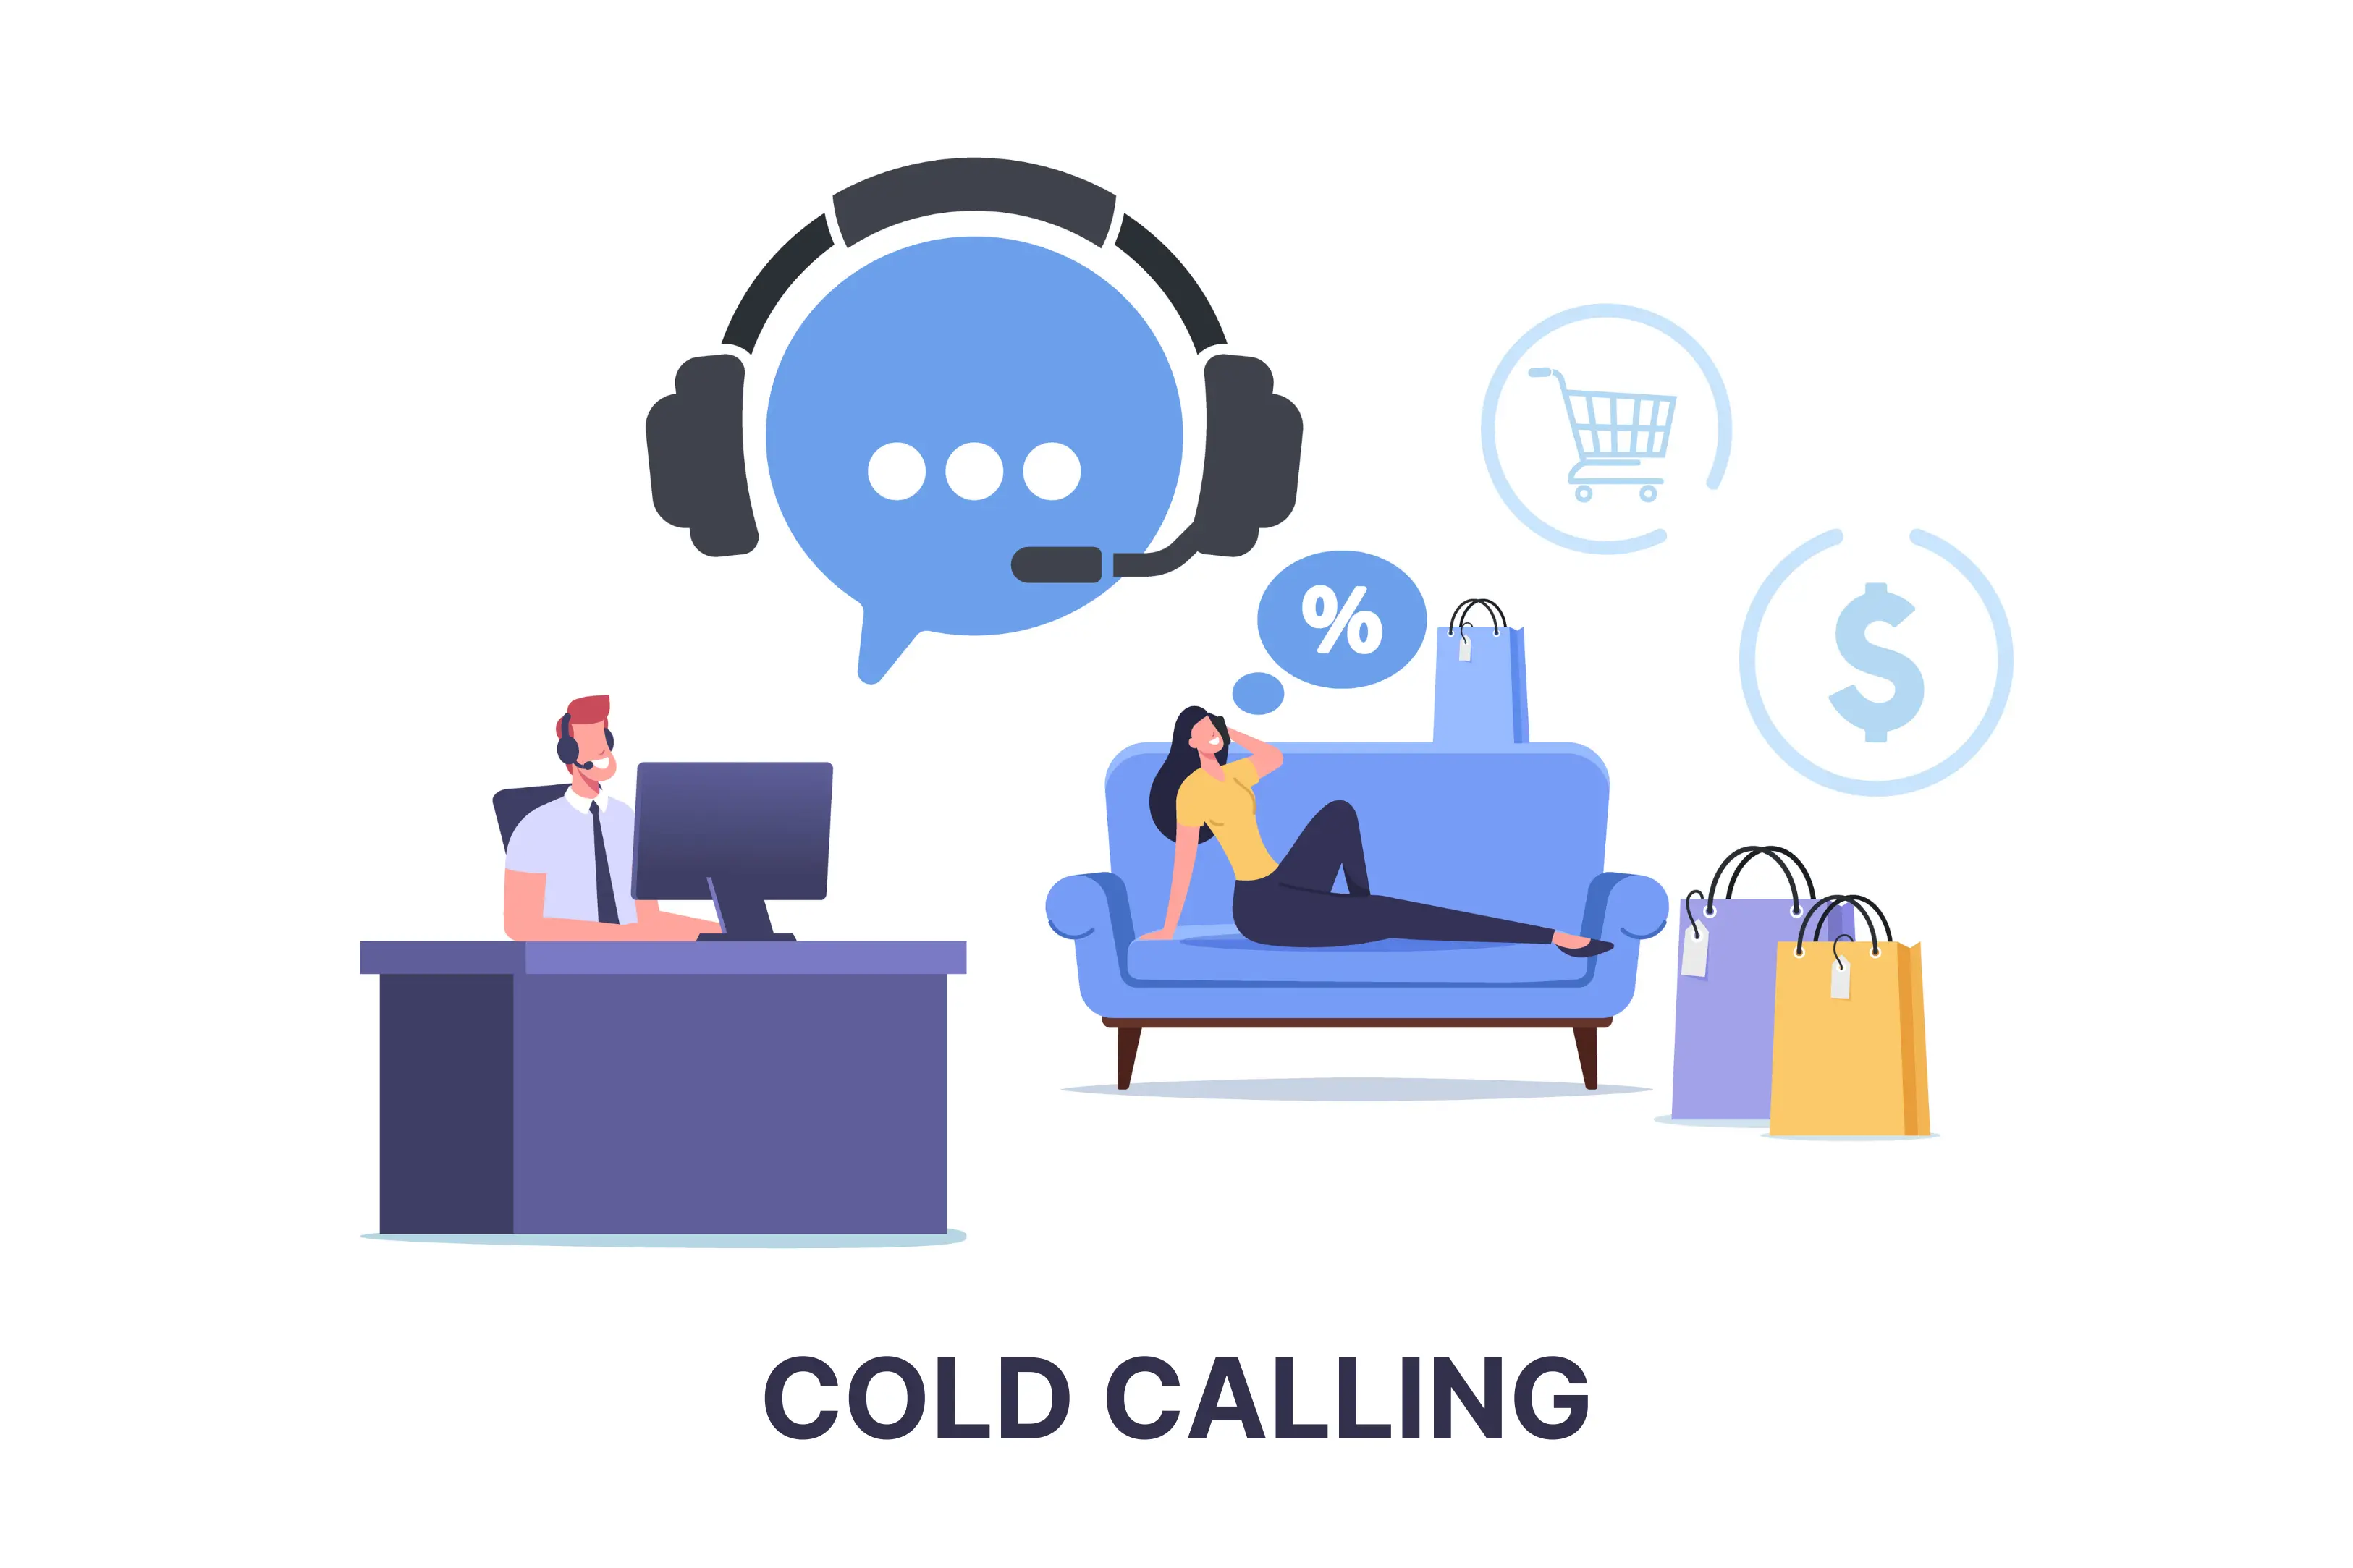 Sales call telecaller selling product or service via telemarketing phone sales to customer call support centre communicate with operator cartoon people